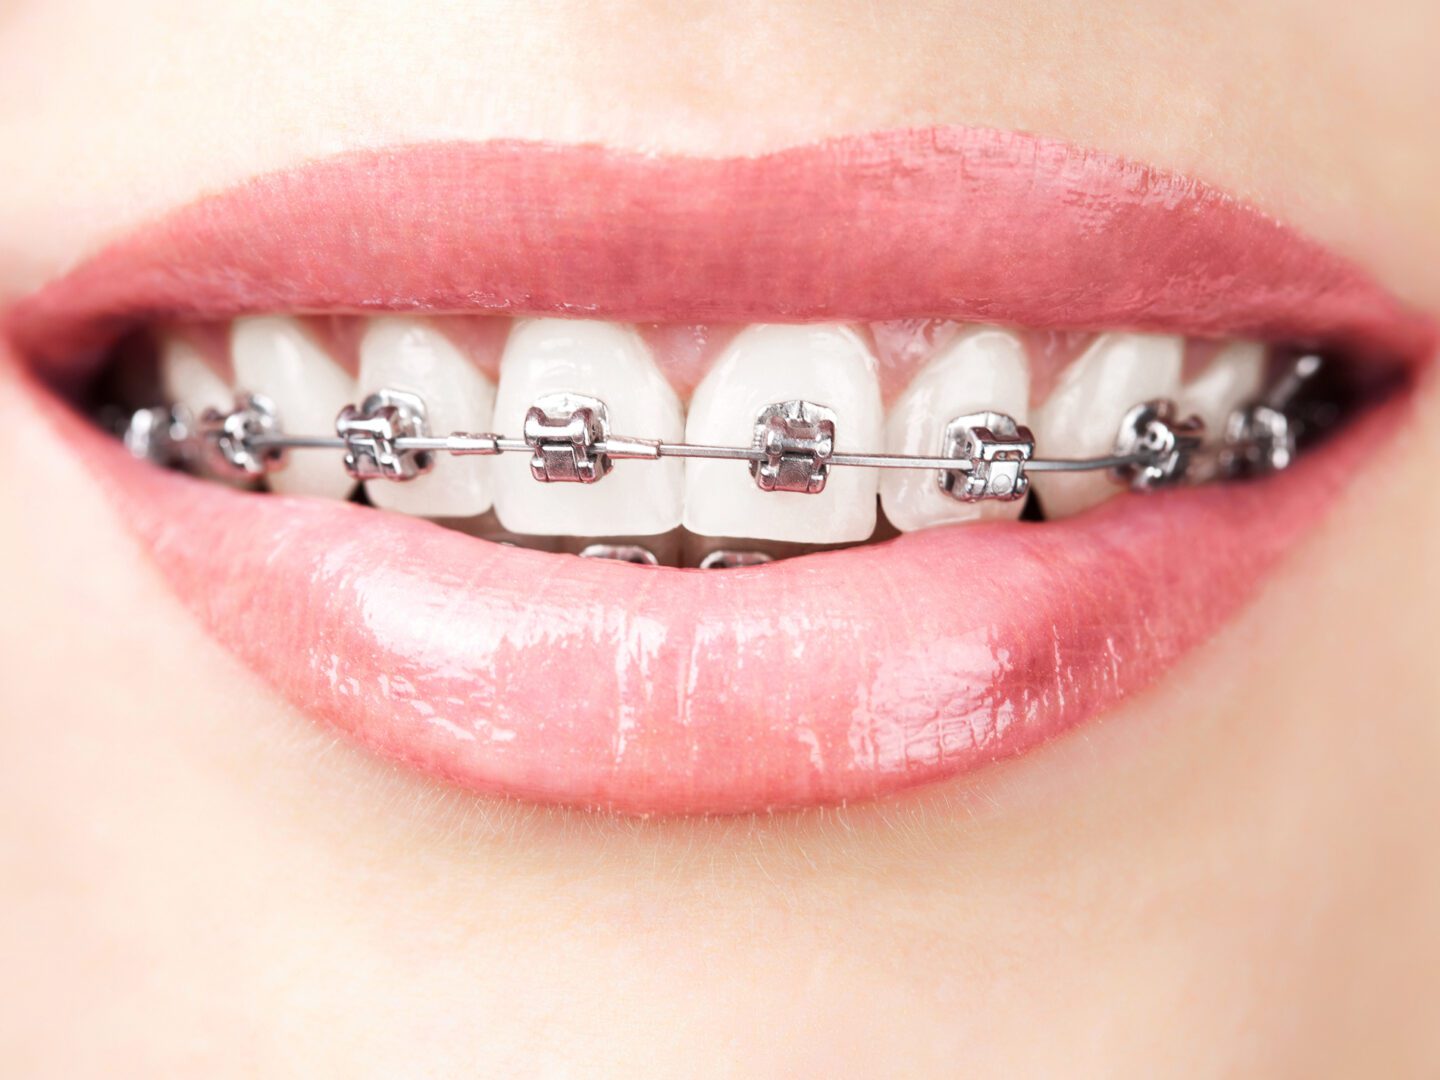 A woman with braces on her teeth is smiling.